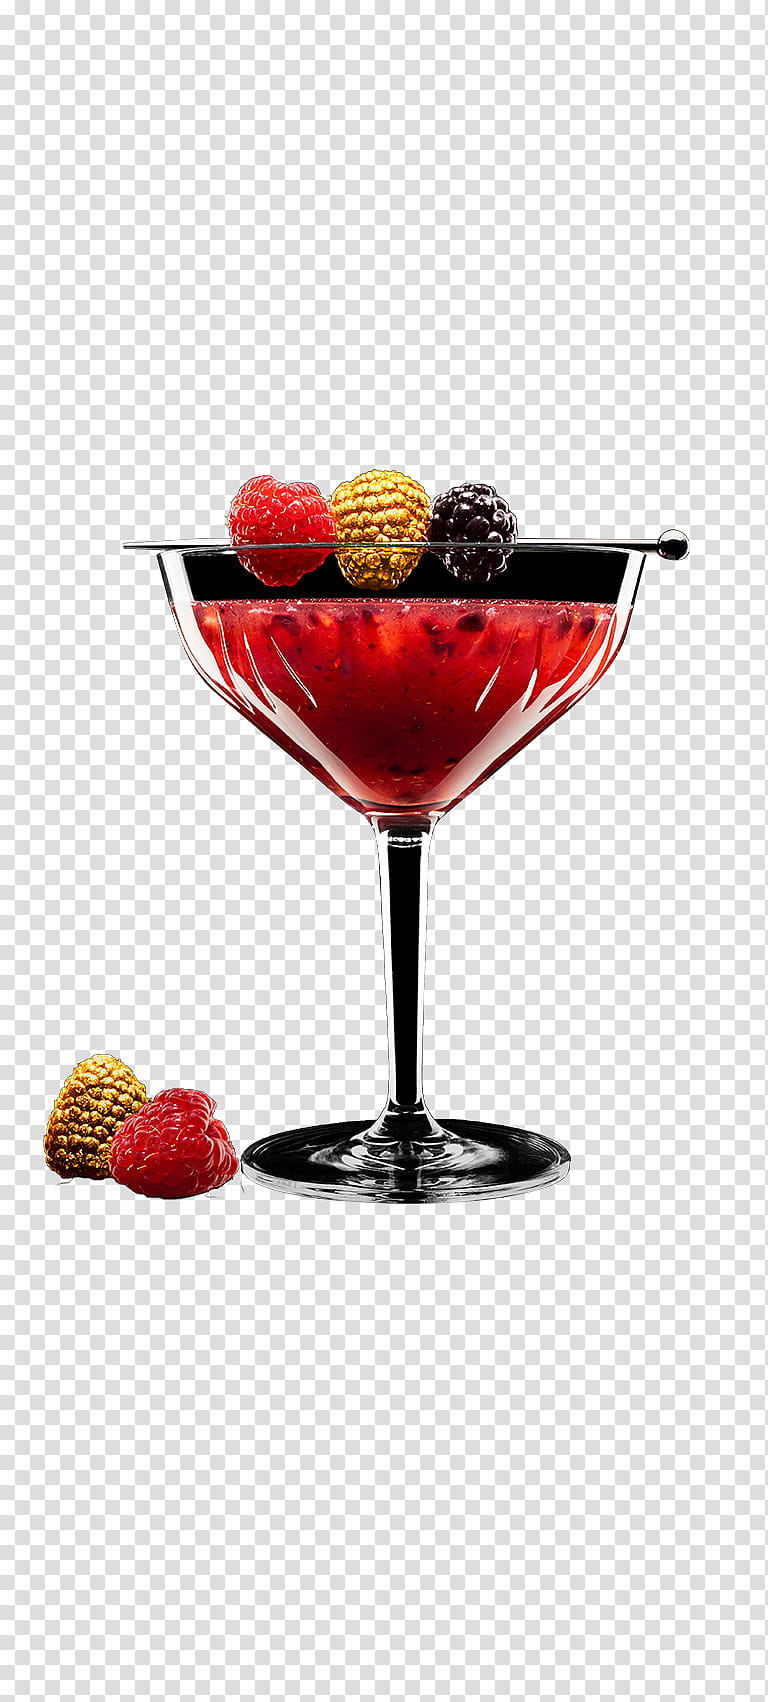 Wine Glass, Cocktail Garnish, Martini, Wine Cocktail, Cosmopolitan, Blood And Sand, Cocktail Glass, Champagne Glass transparent background PNG clipart